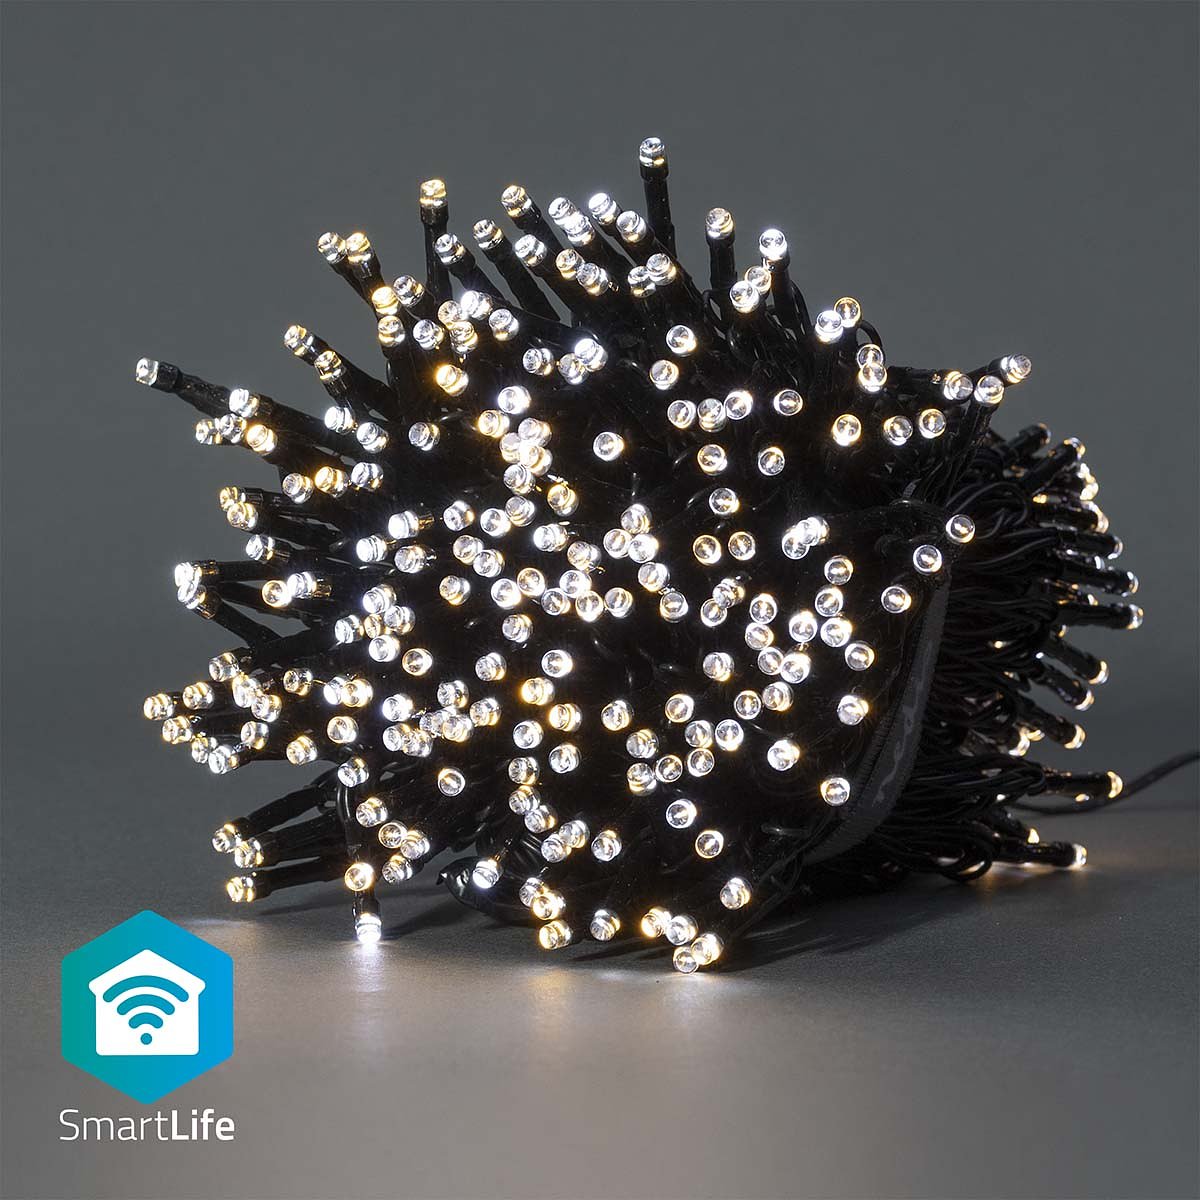 Nedis SmartLife Decoratieve LED | Wi-Fi | Warm tot koel wit | 400 LED's | 20.0 m | Android / IOS